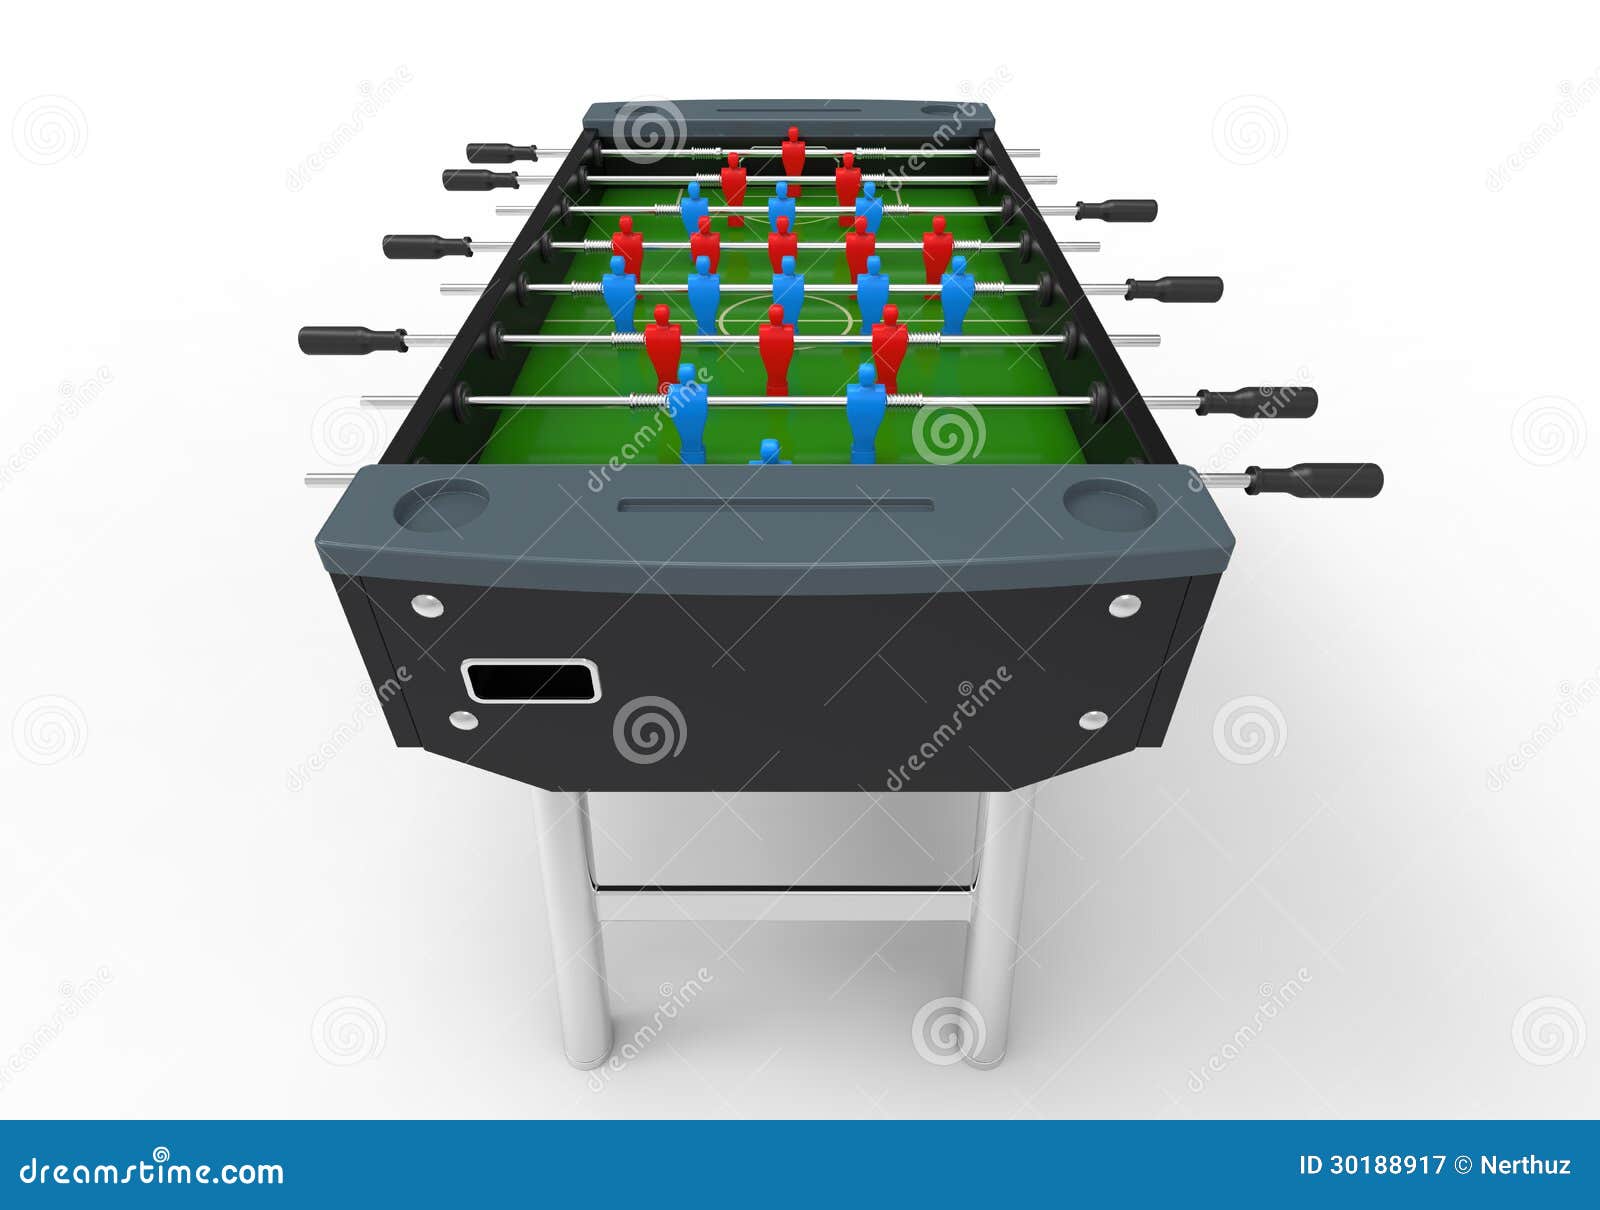 Foosball Soccer Table Game Royalty Free Stock Photography 